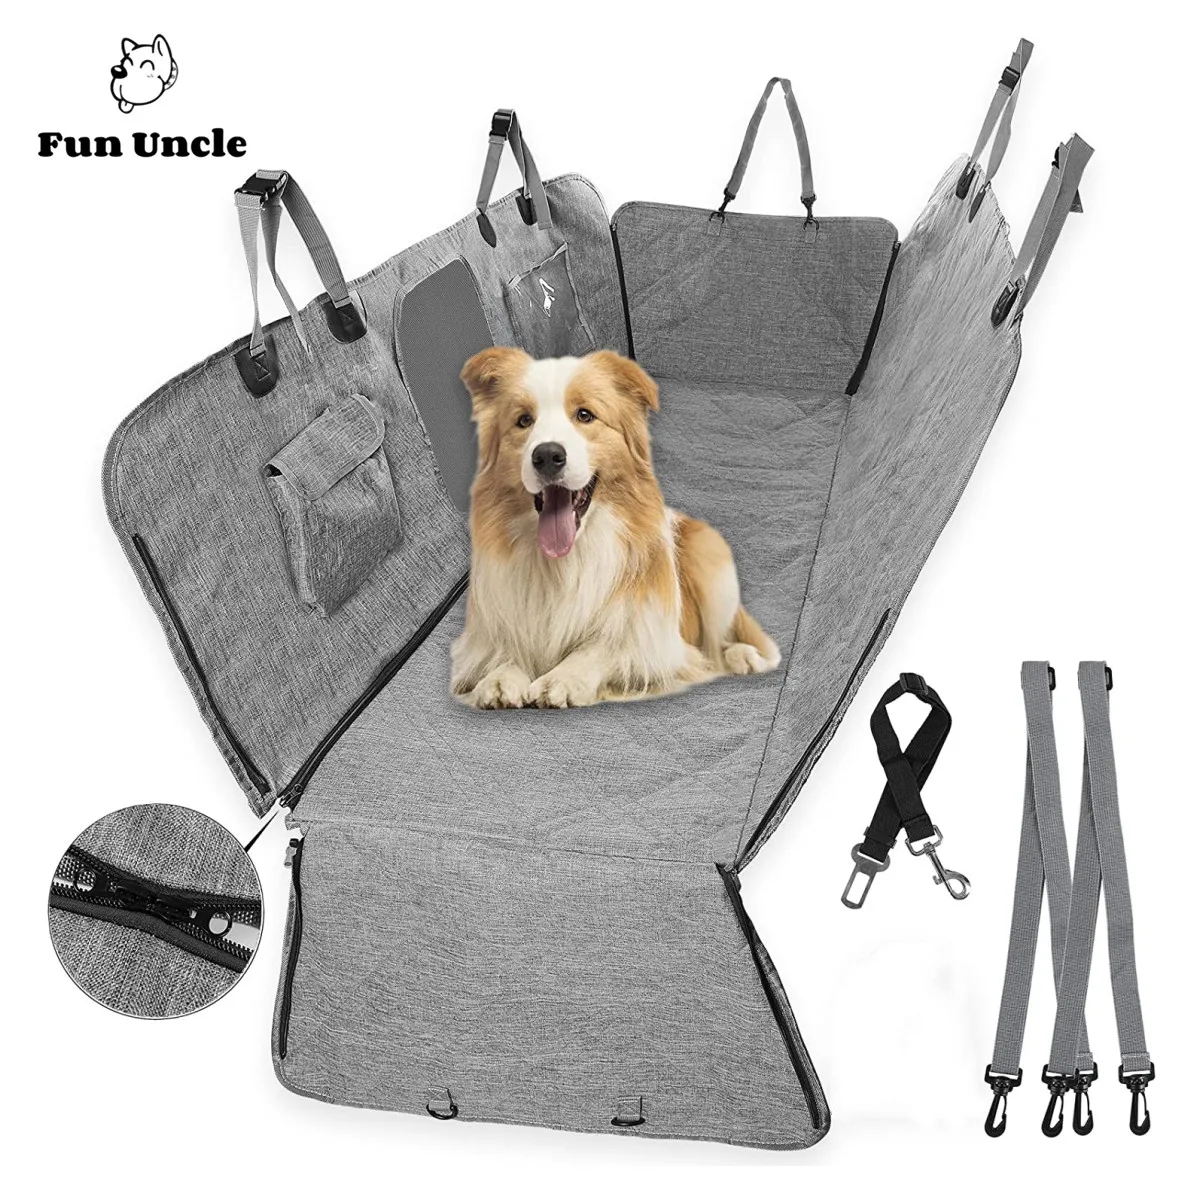 https://ae01.alicdn.com/kf/Se922edbf2d7349f7b08796aeb82fd6dd3/Dog-Car-Seat-Cover-for-Back-Seat-with-2-Way-Zippers-Waterproof-Dog-Hammock-Back-Seat.jpg